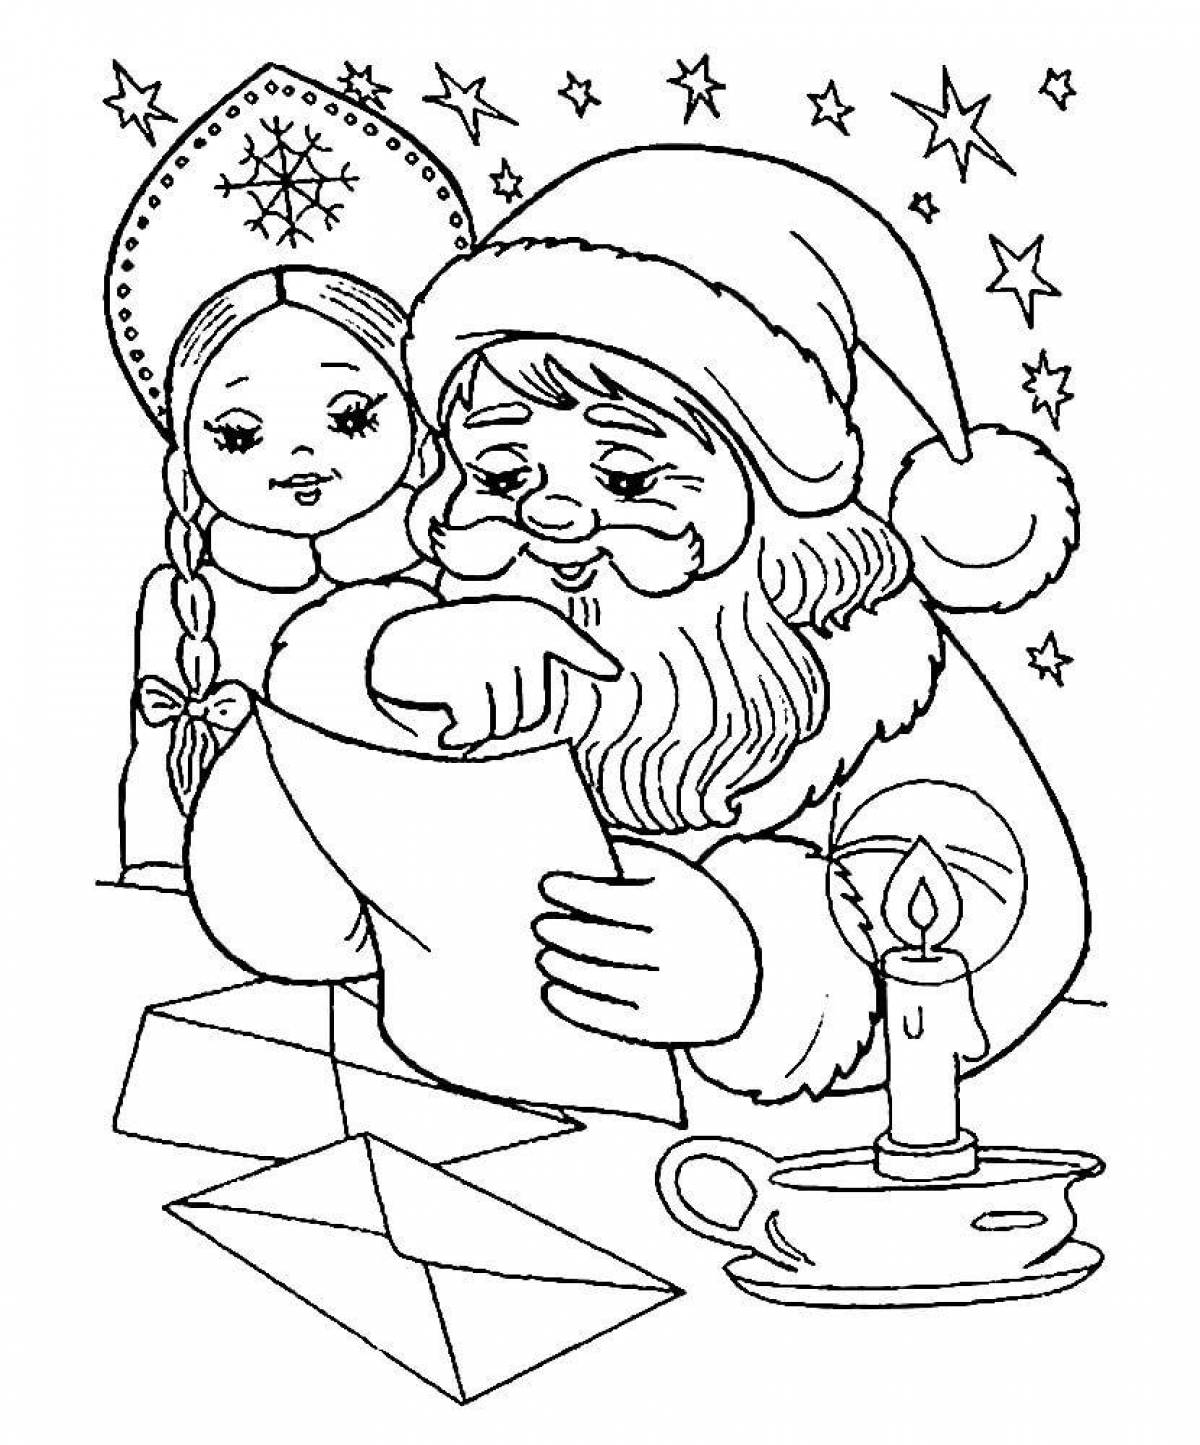 Santa Claus and Snow Maiden for kids #5